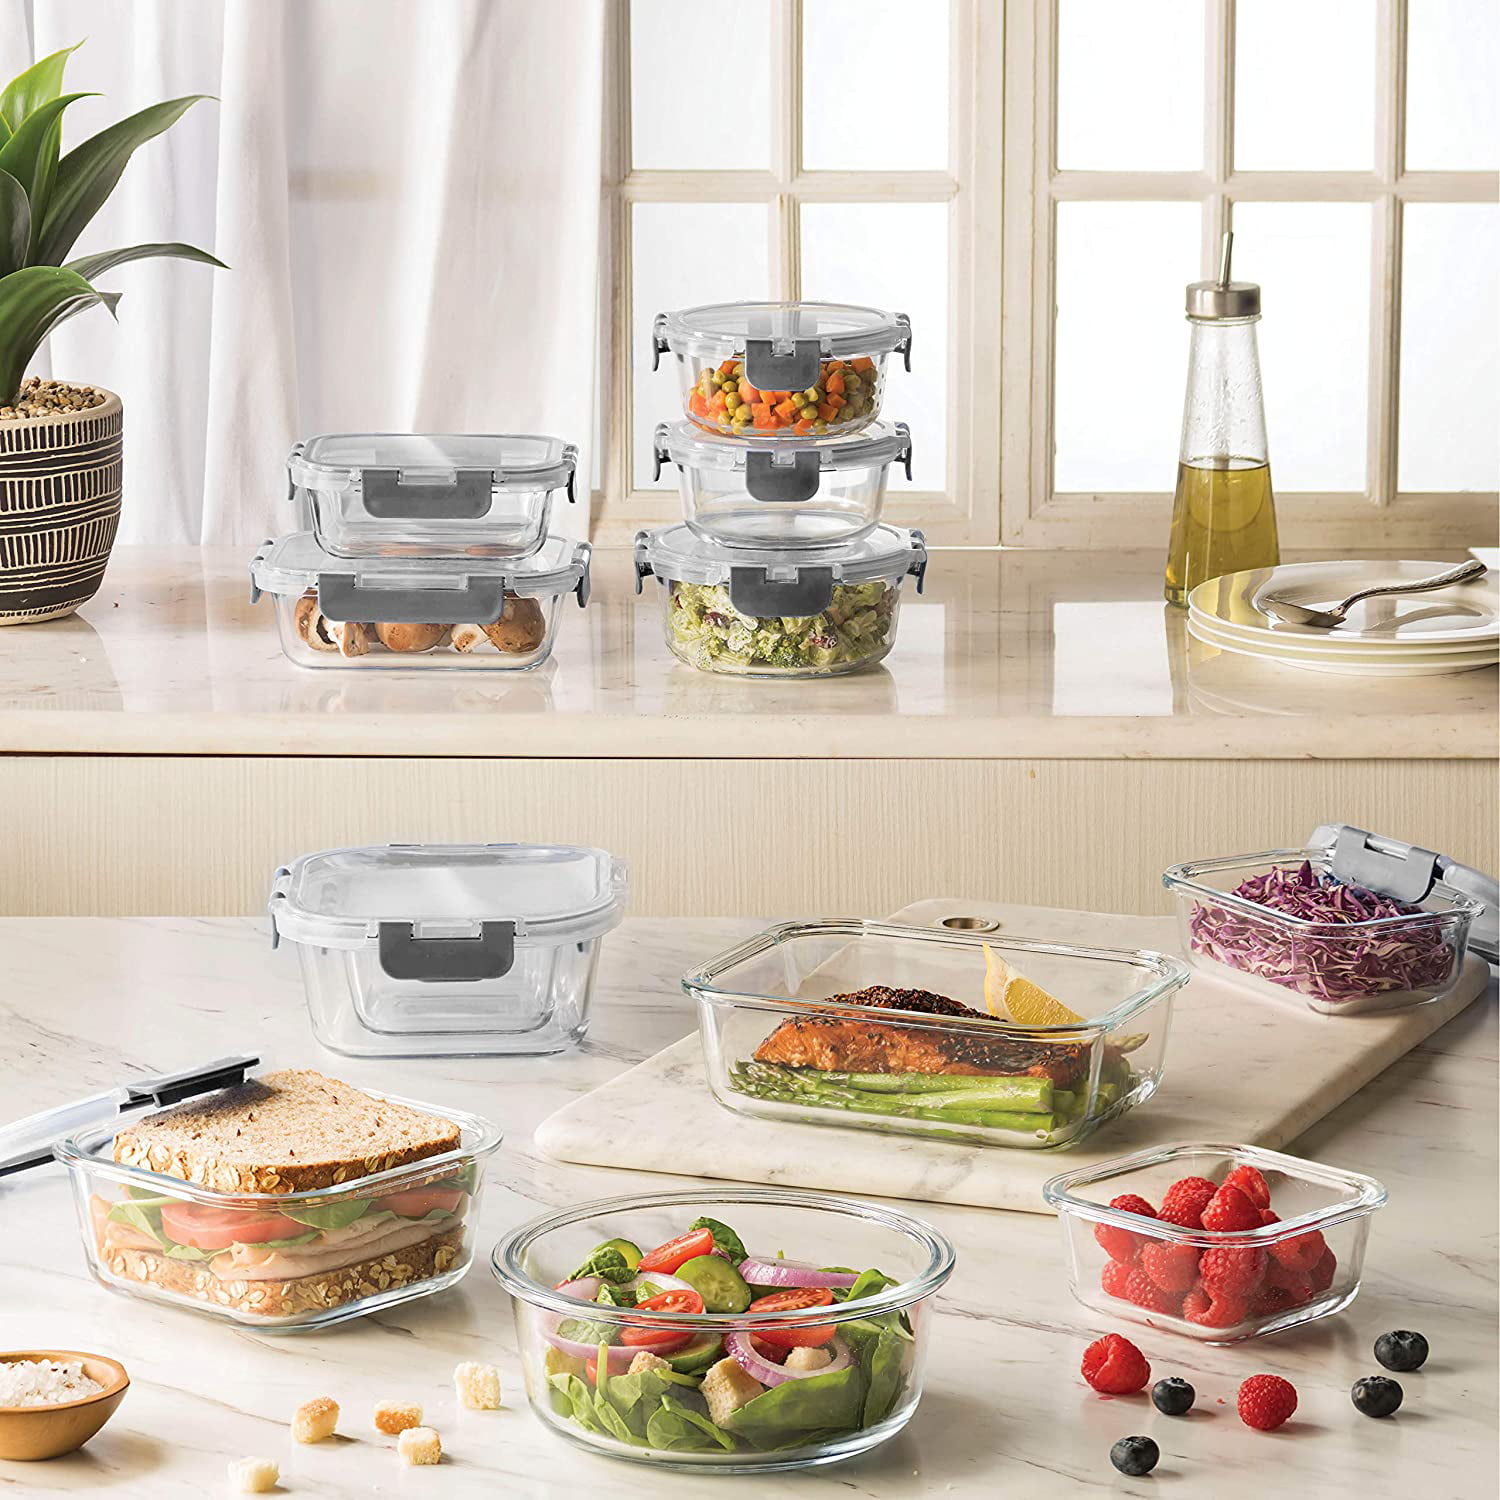  FineDine 6-Piece Superior Glass Food Storage Containers Set,  32oz Capacity - Newly Innovated Hinged Locking lids - 100% Leakproof Glass  Meal-Prep Containers, Freezer-to-Oven-Safe (Grey): Home & Kitchen